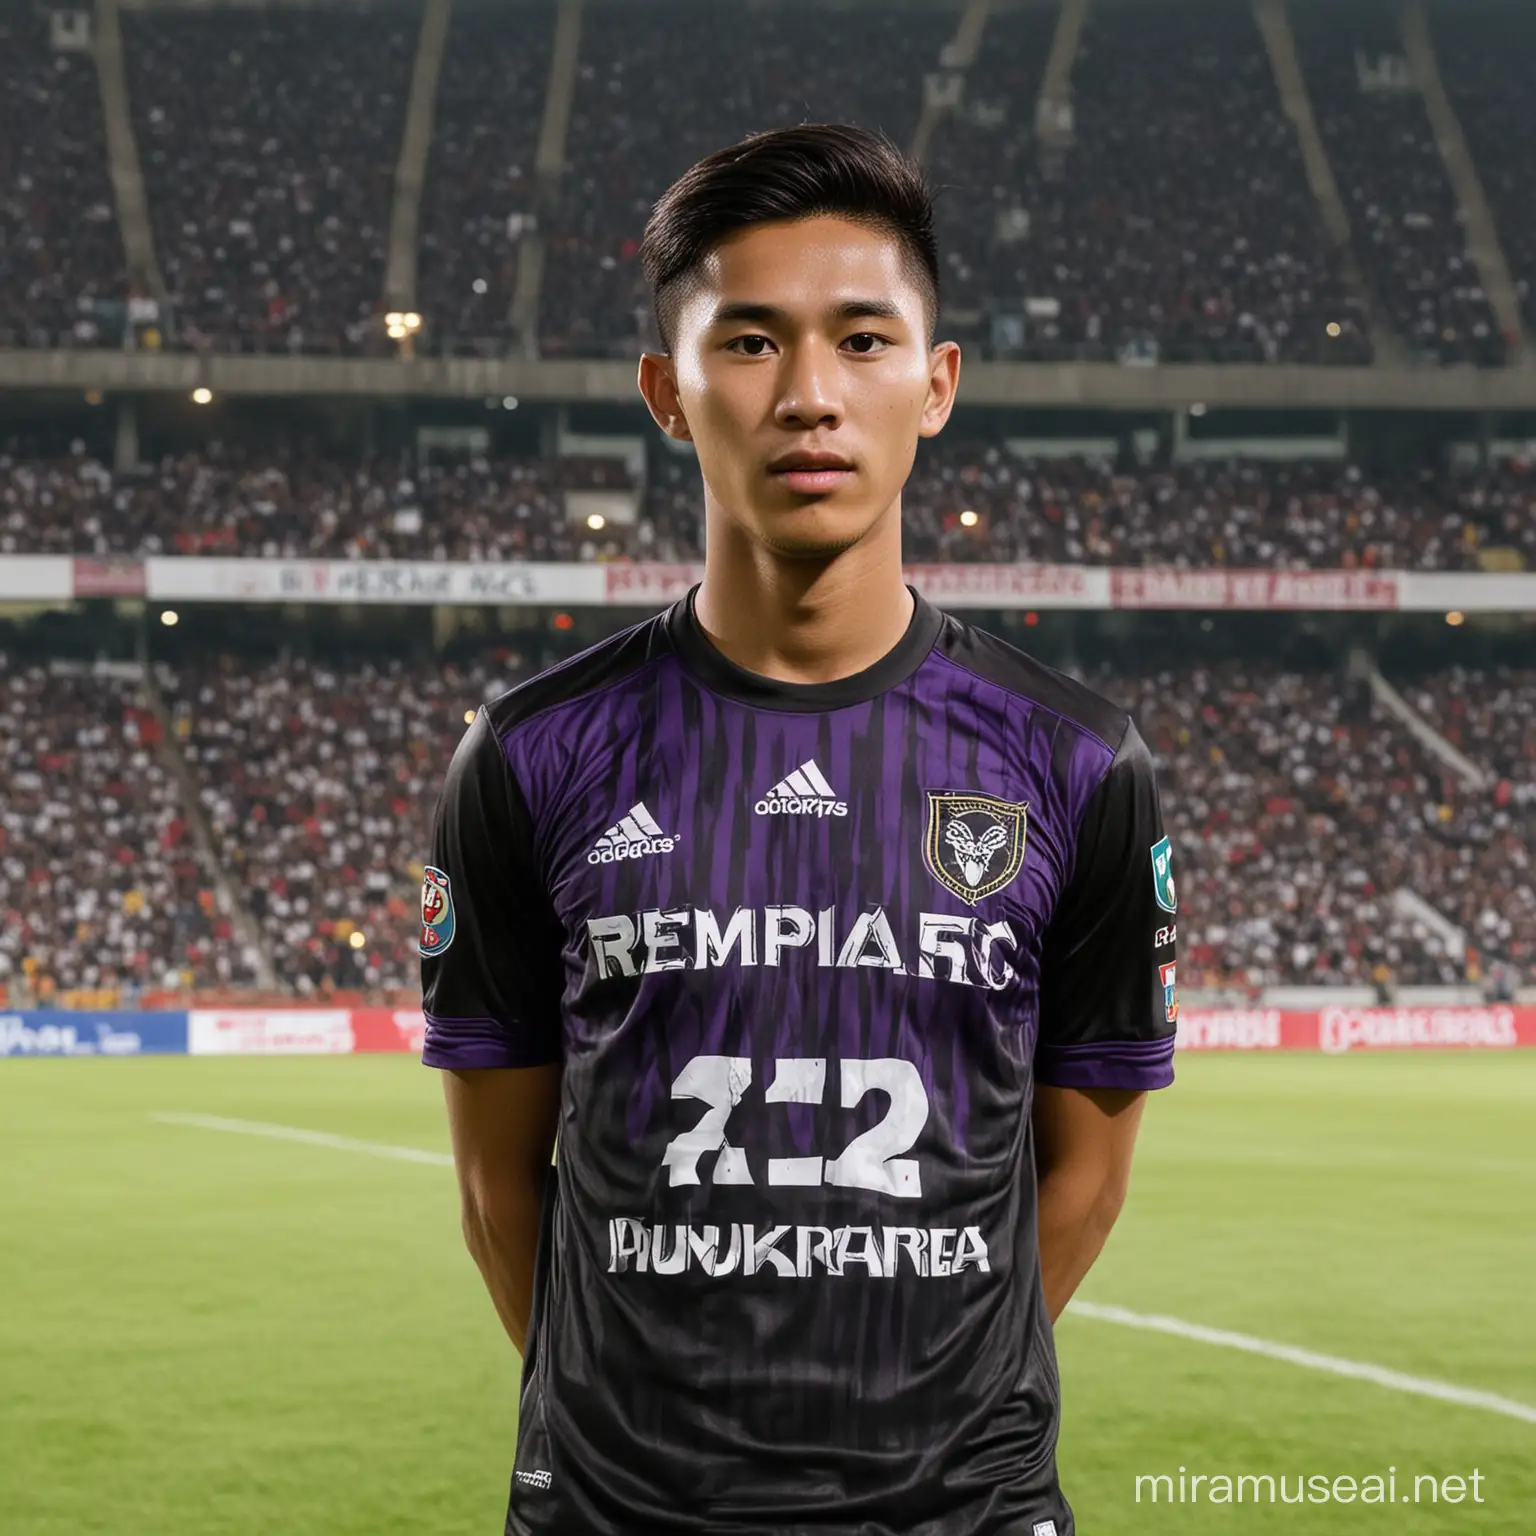 photo of a 23 year old Indonesian soccer player, wearing a black and purple team shirt, with the words "REMPAS FC" on the front of the shirt, the background is the Gelora Bung Karno Jakarta soccer stadium